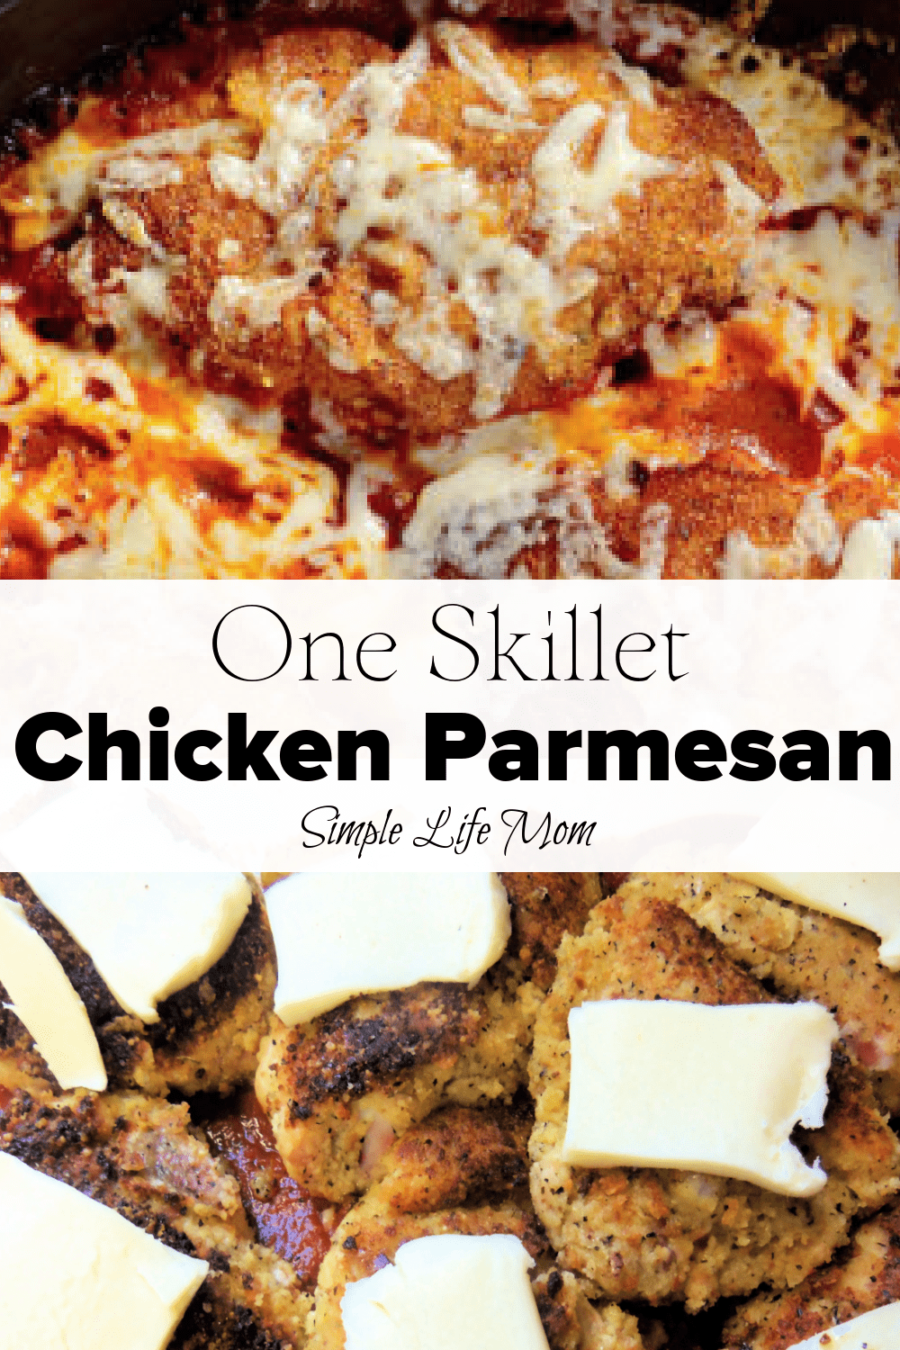 This one skillet chicken parmesan recipe makes a great weeknight meal or easy dinner for friends. A one skillet meal with marinara sauce. Gluten Free dinner.